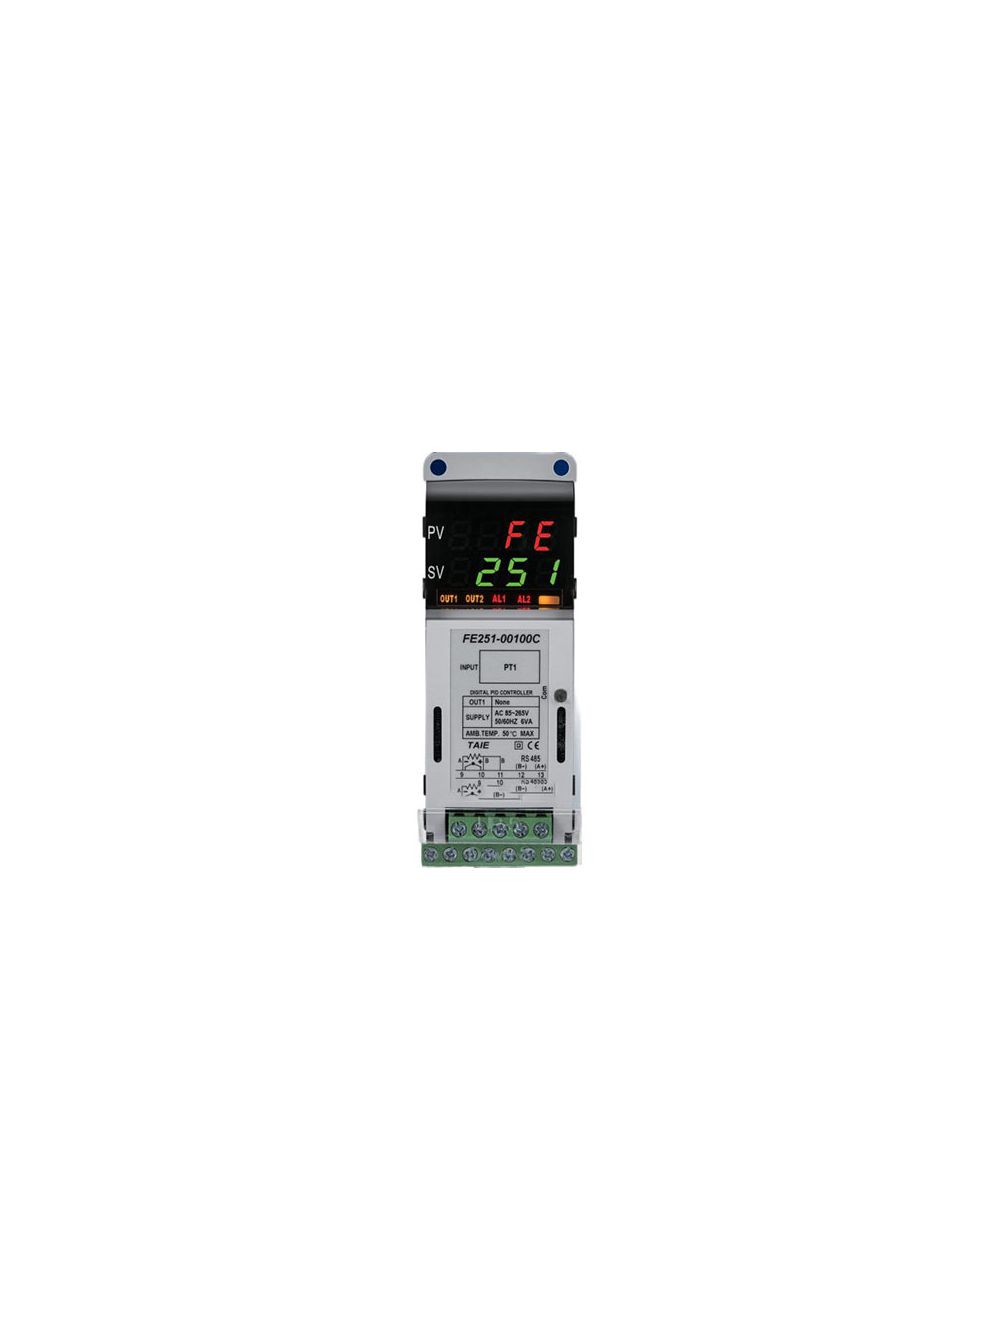 New In stock for sale, TAIE Temperature Controller FE300-30100B